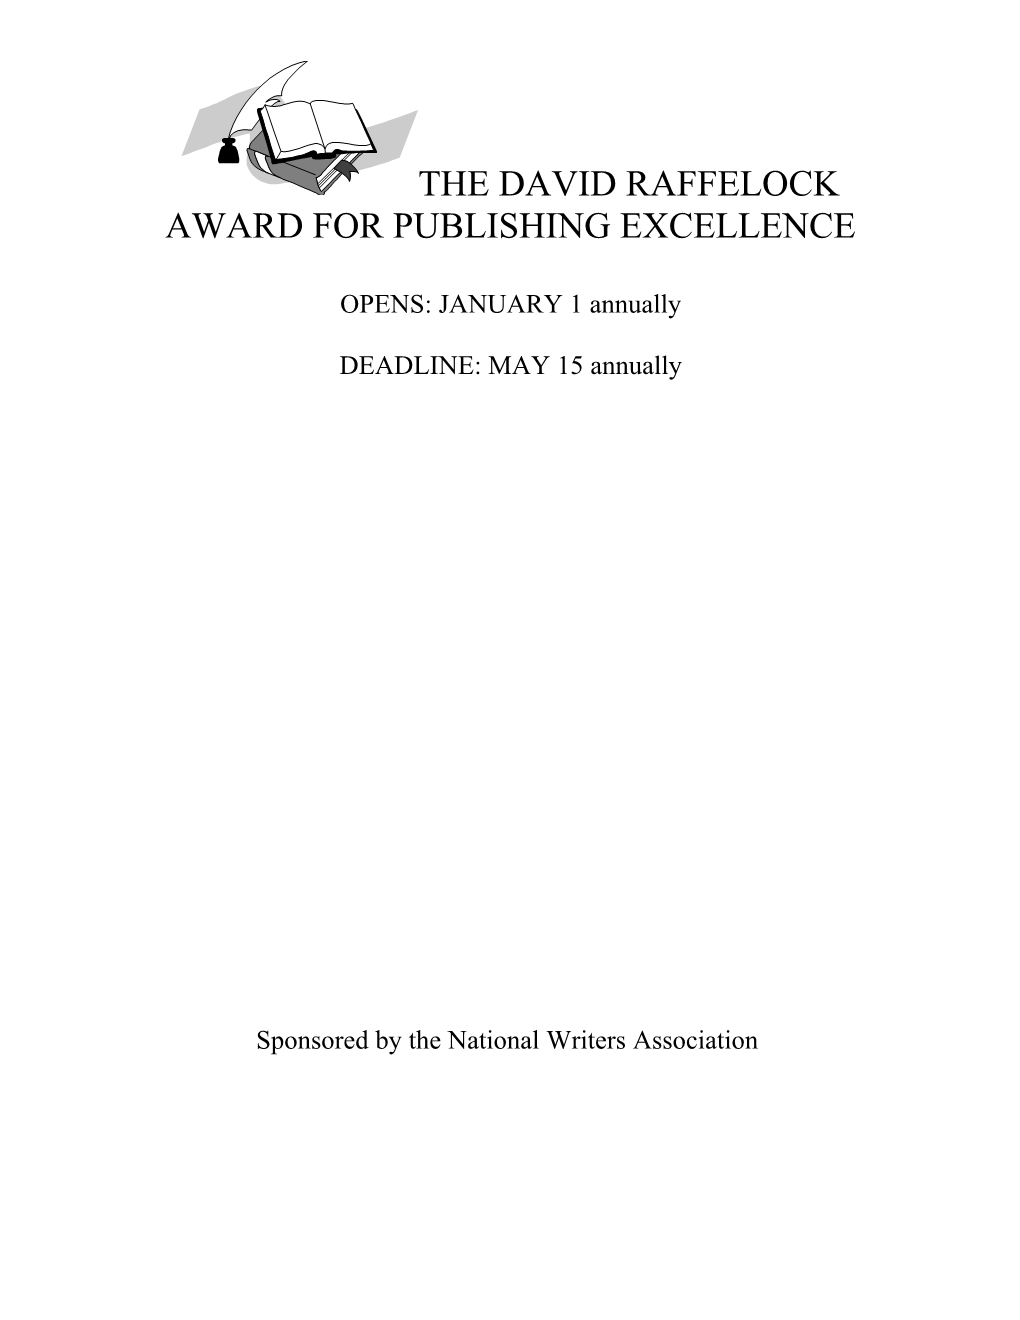 The David Raffelock Award for Publishing Excellence